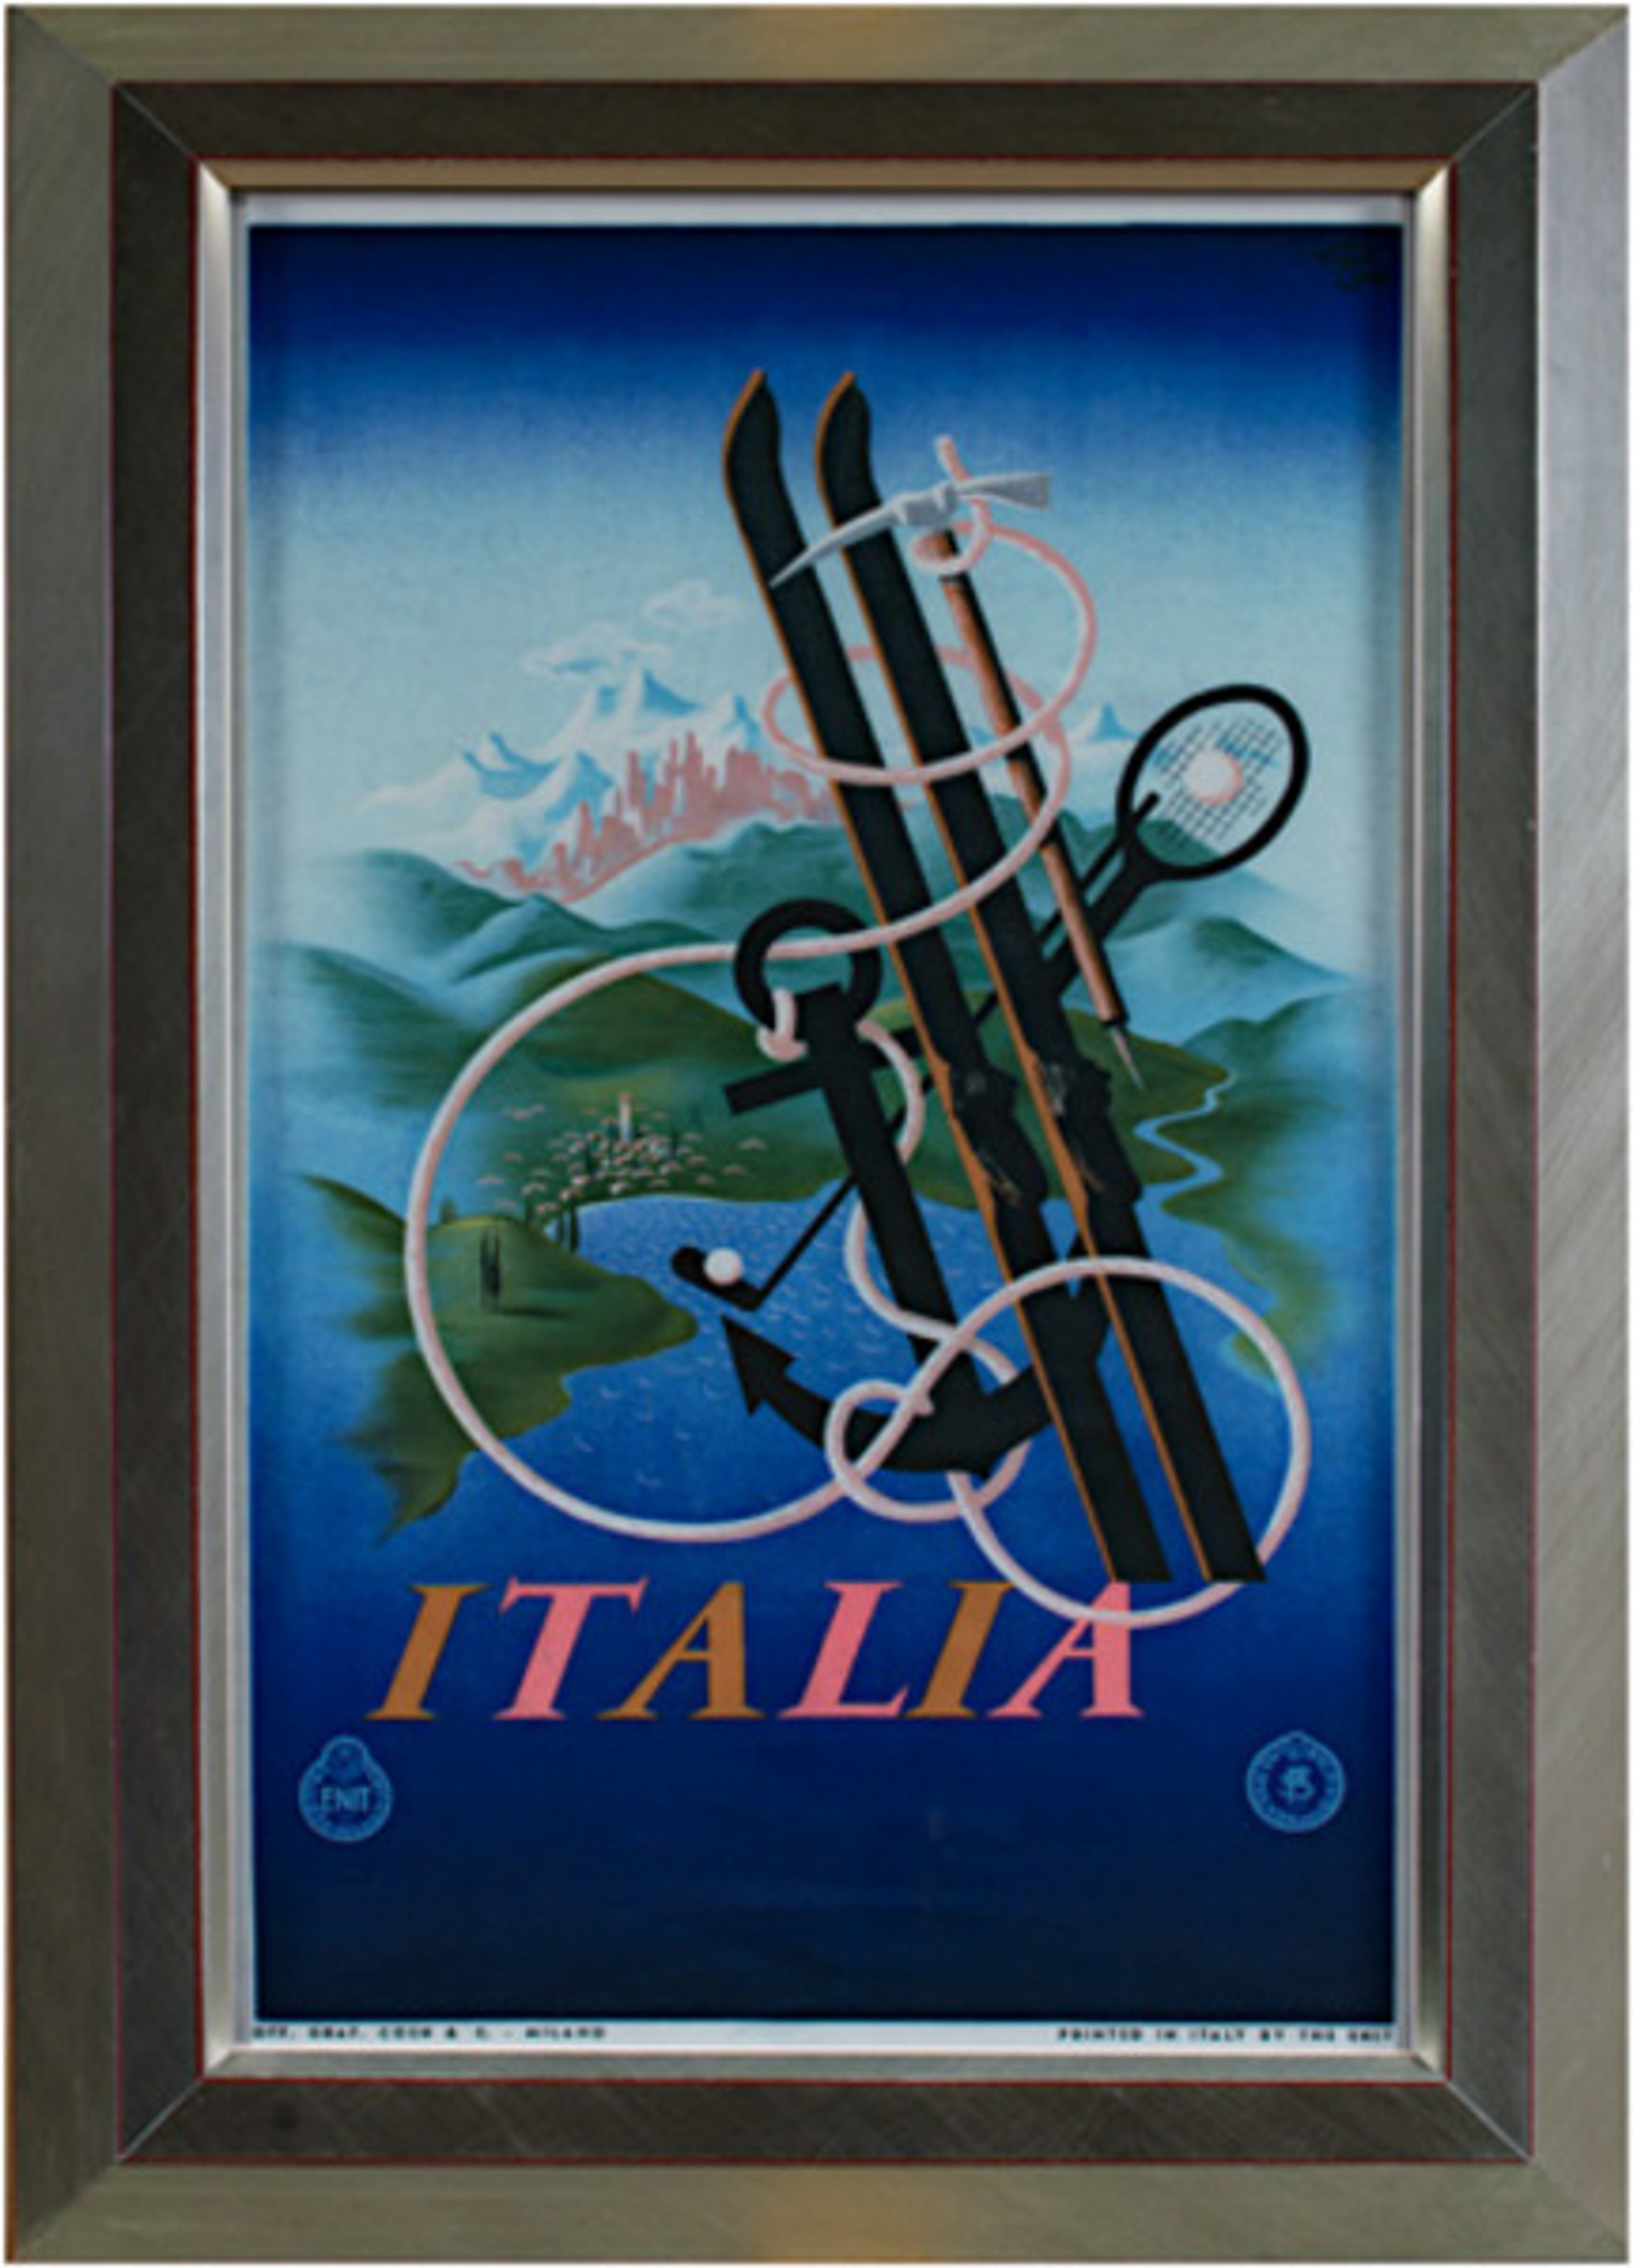 Italia by A.M. (Adolphe Mouron) Cassandre